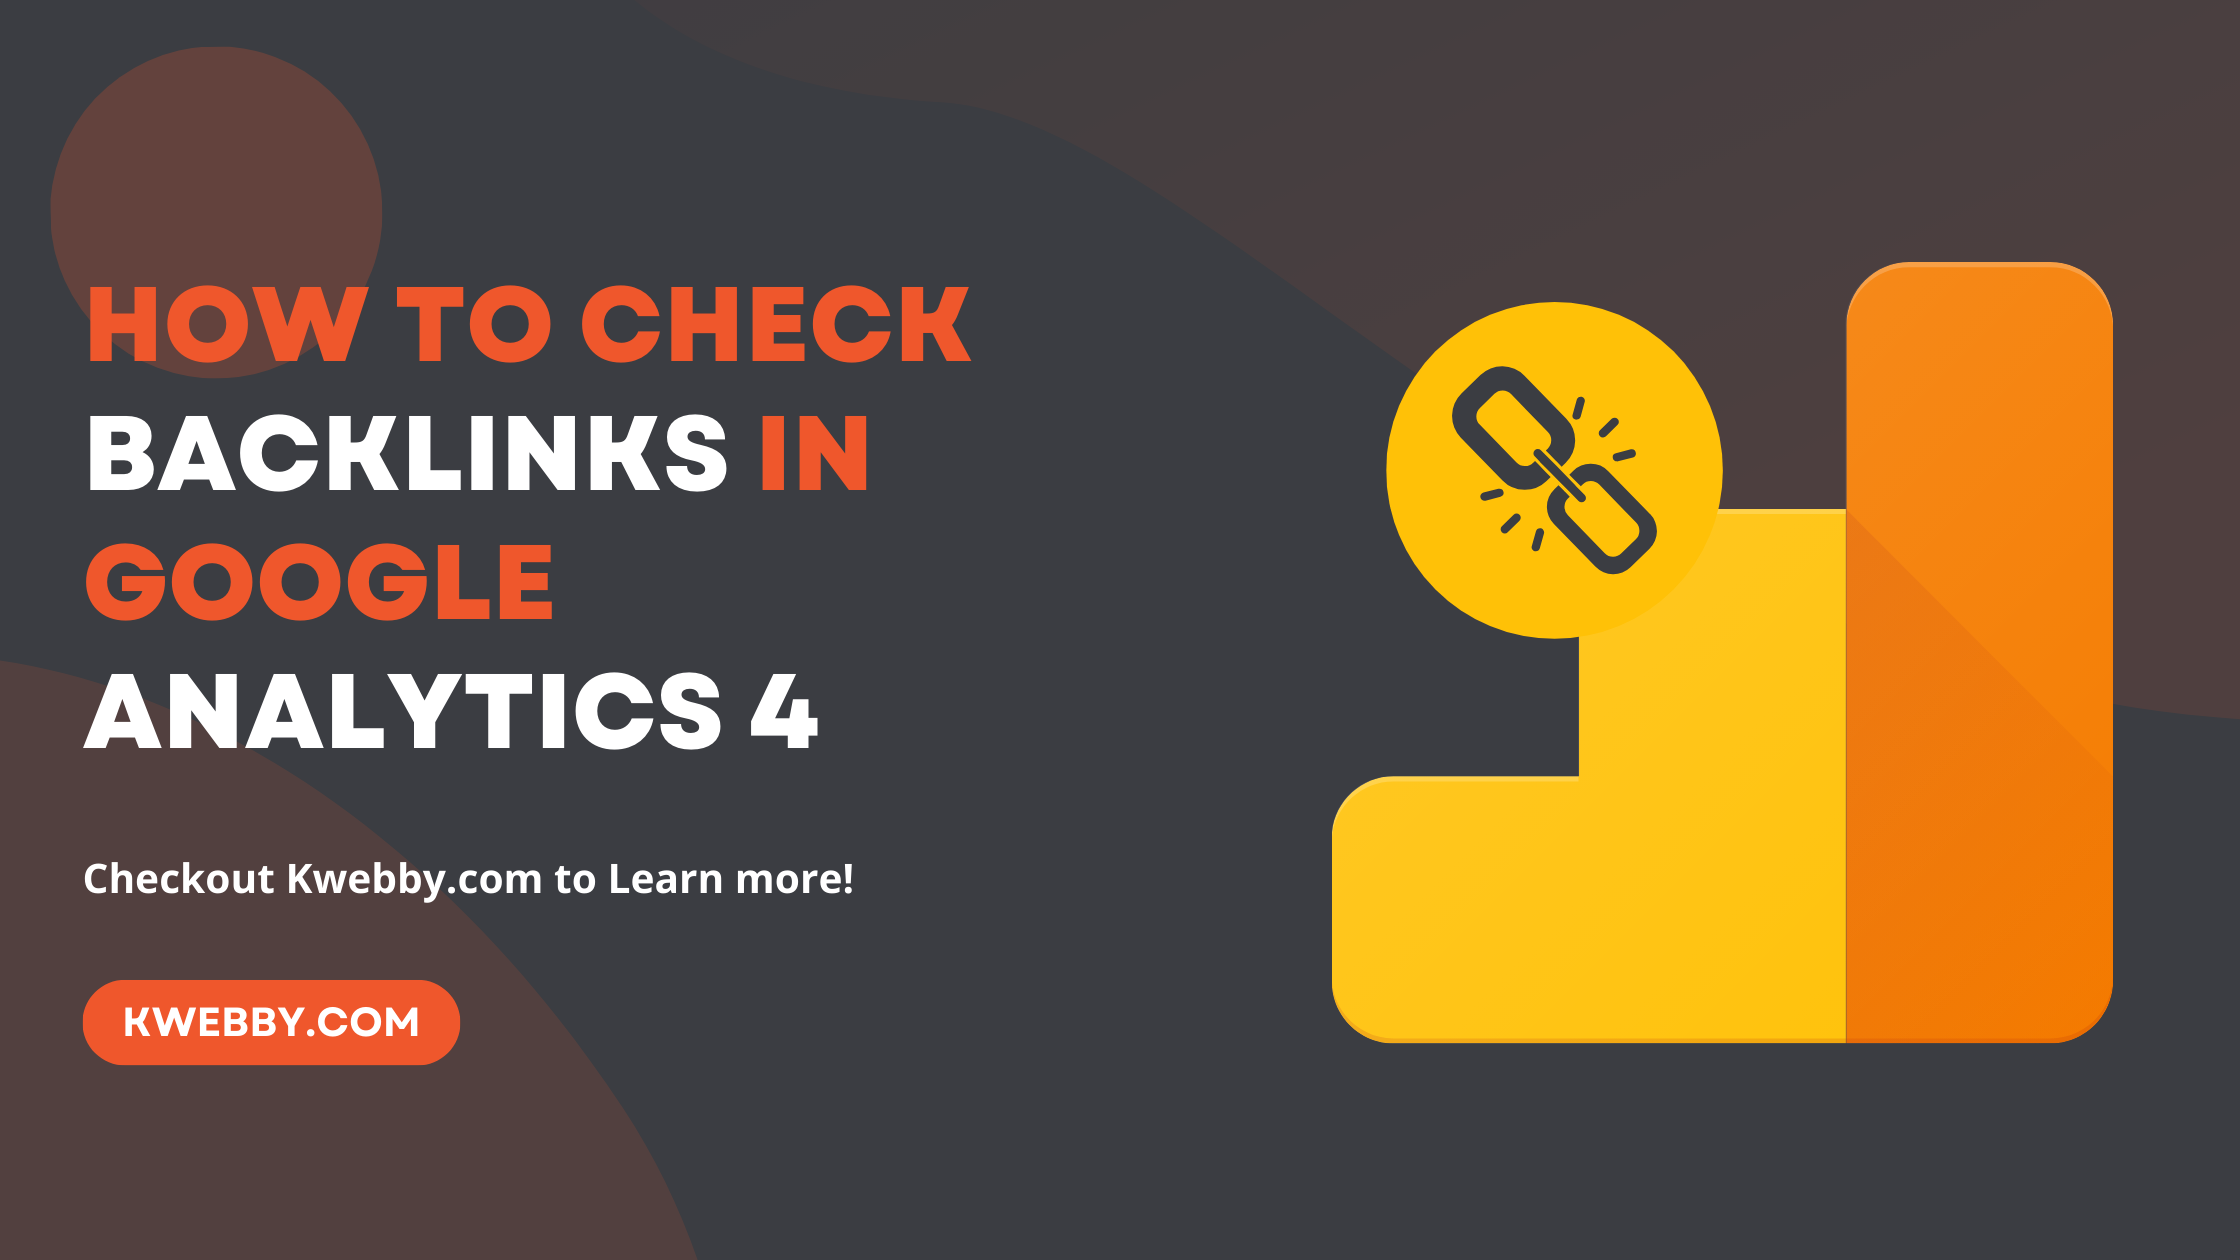 How to check backlinks in Google Analytics 4